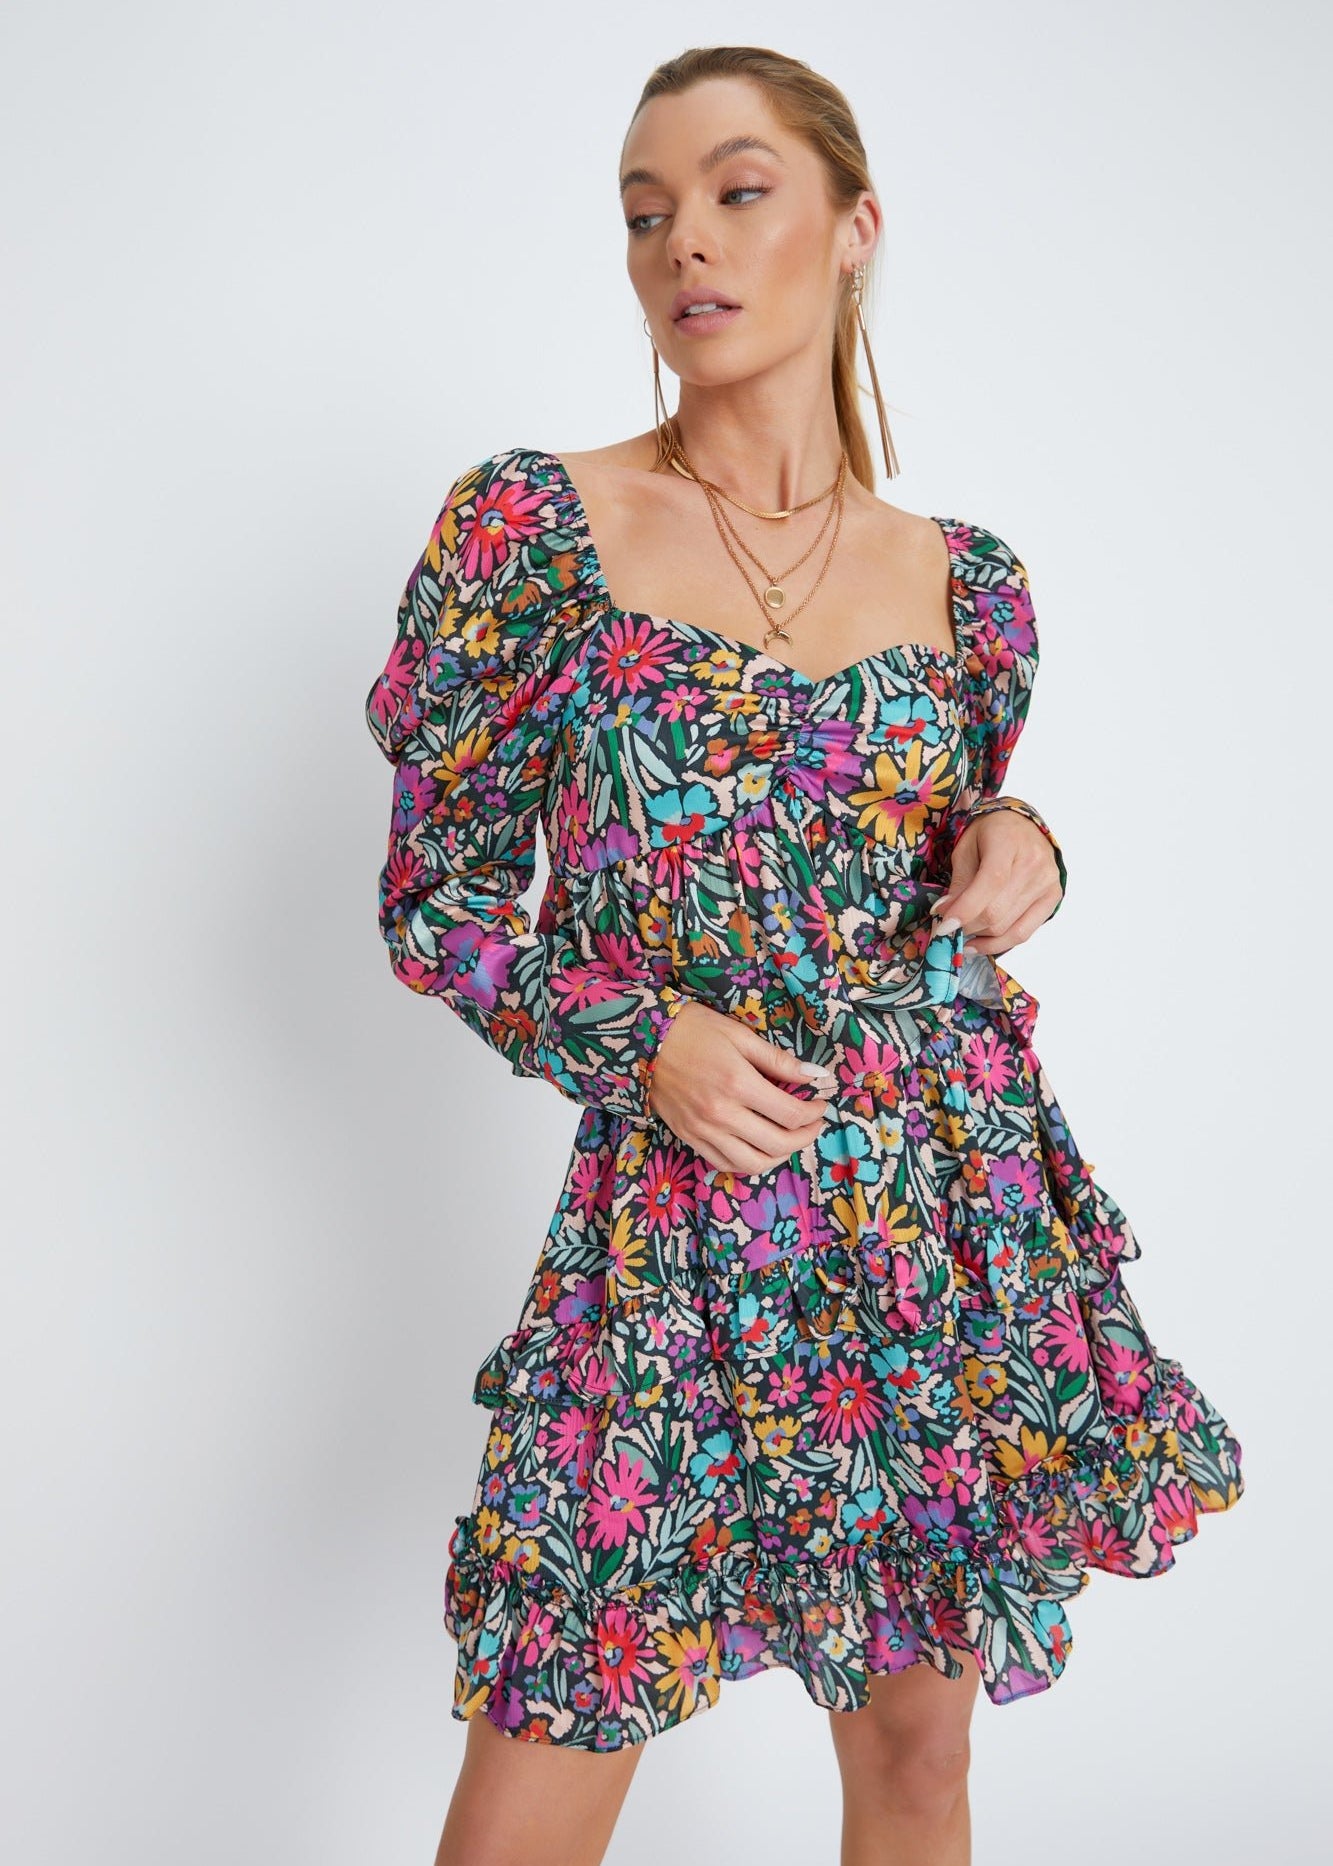 Floral Carly Top - DressbarnShirts & Blouses